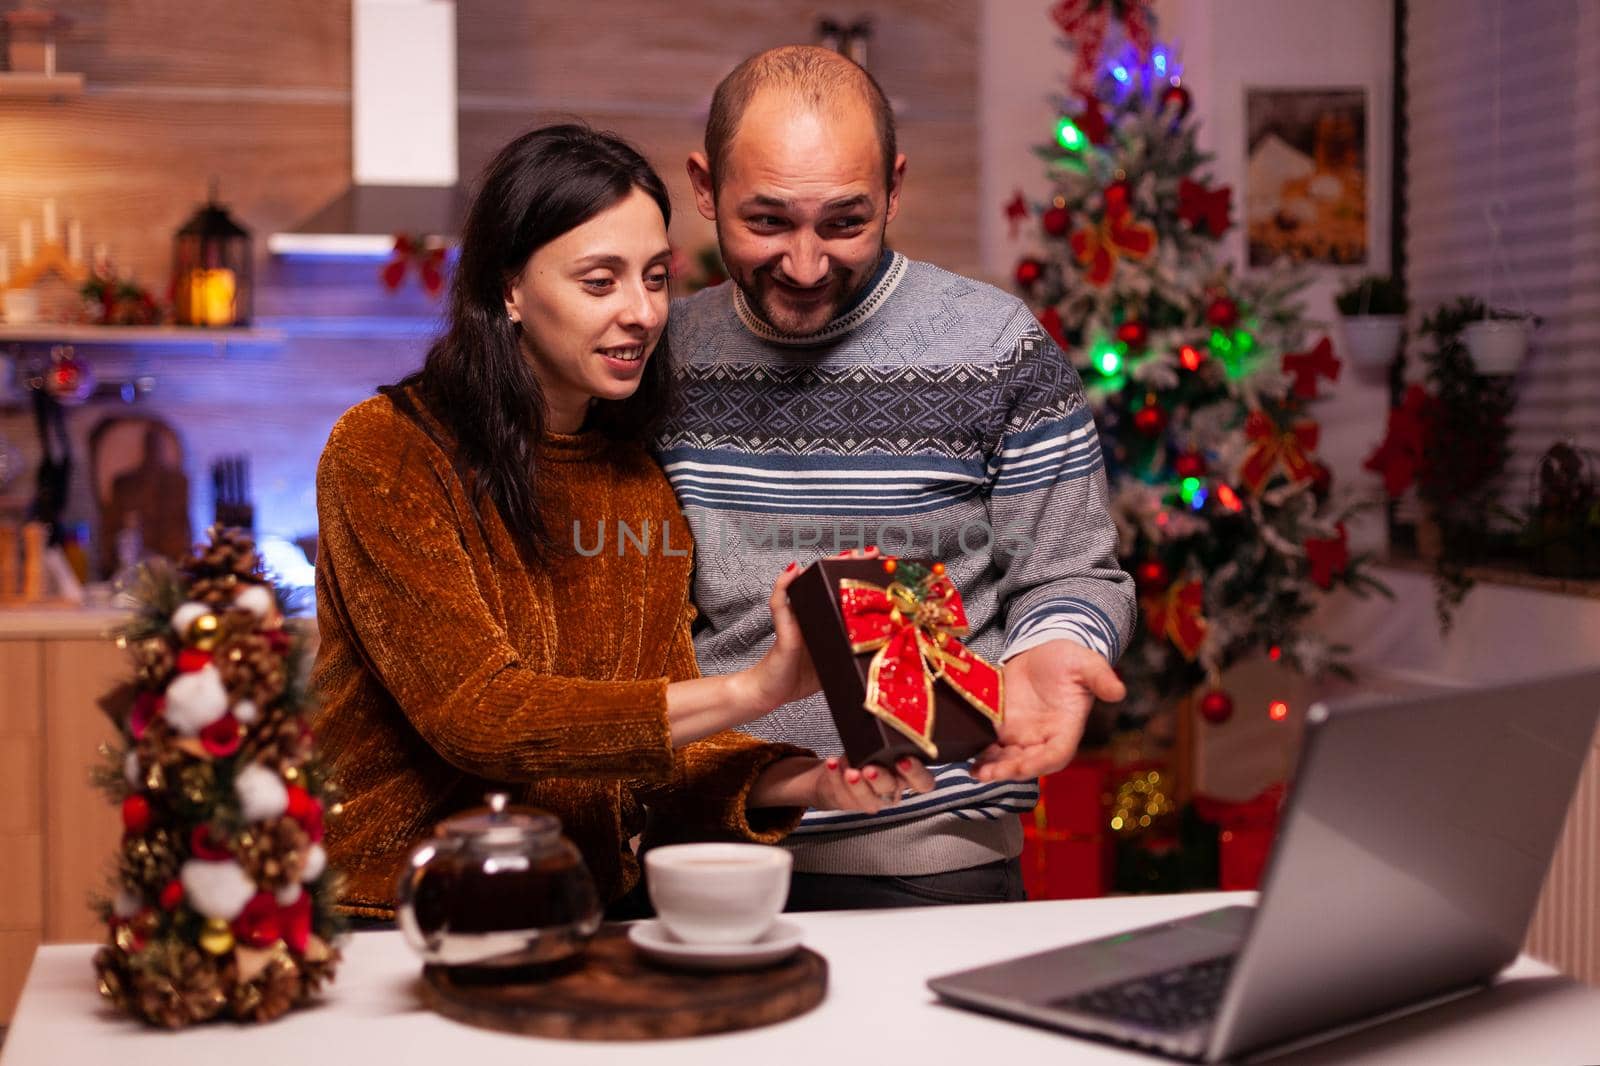 Happy family showing xmas present surprise to remote friends during online videocall by DCStudio